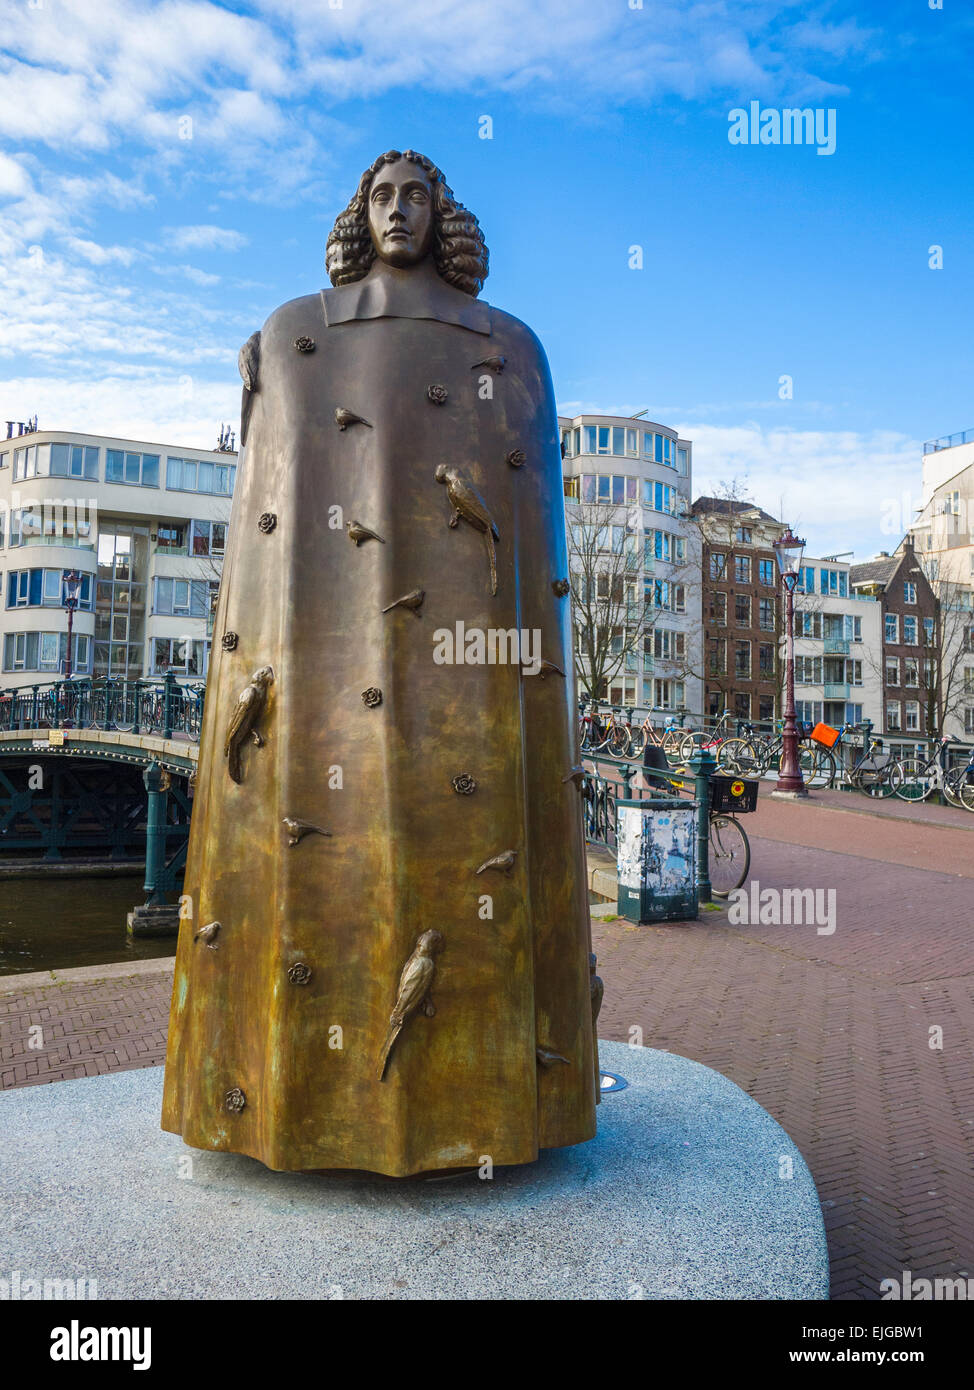 Statue of 17th Century Dutch philosopher Baruch Spinoza (1632 - 1677).  Monument by Nicholas Dings. Amsterdam, Netherlands. Stock Photo